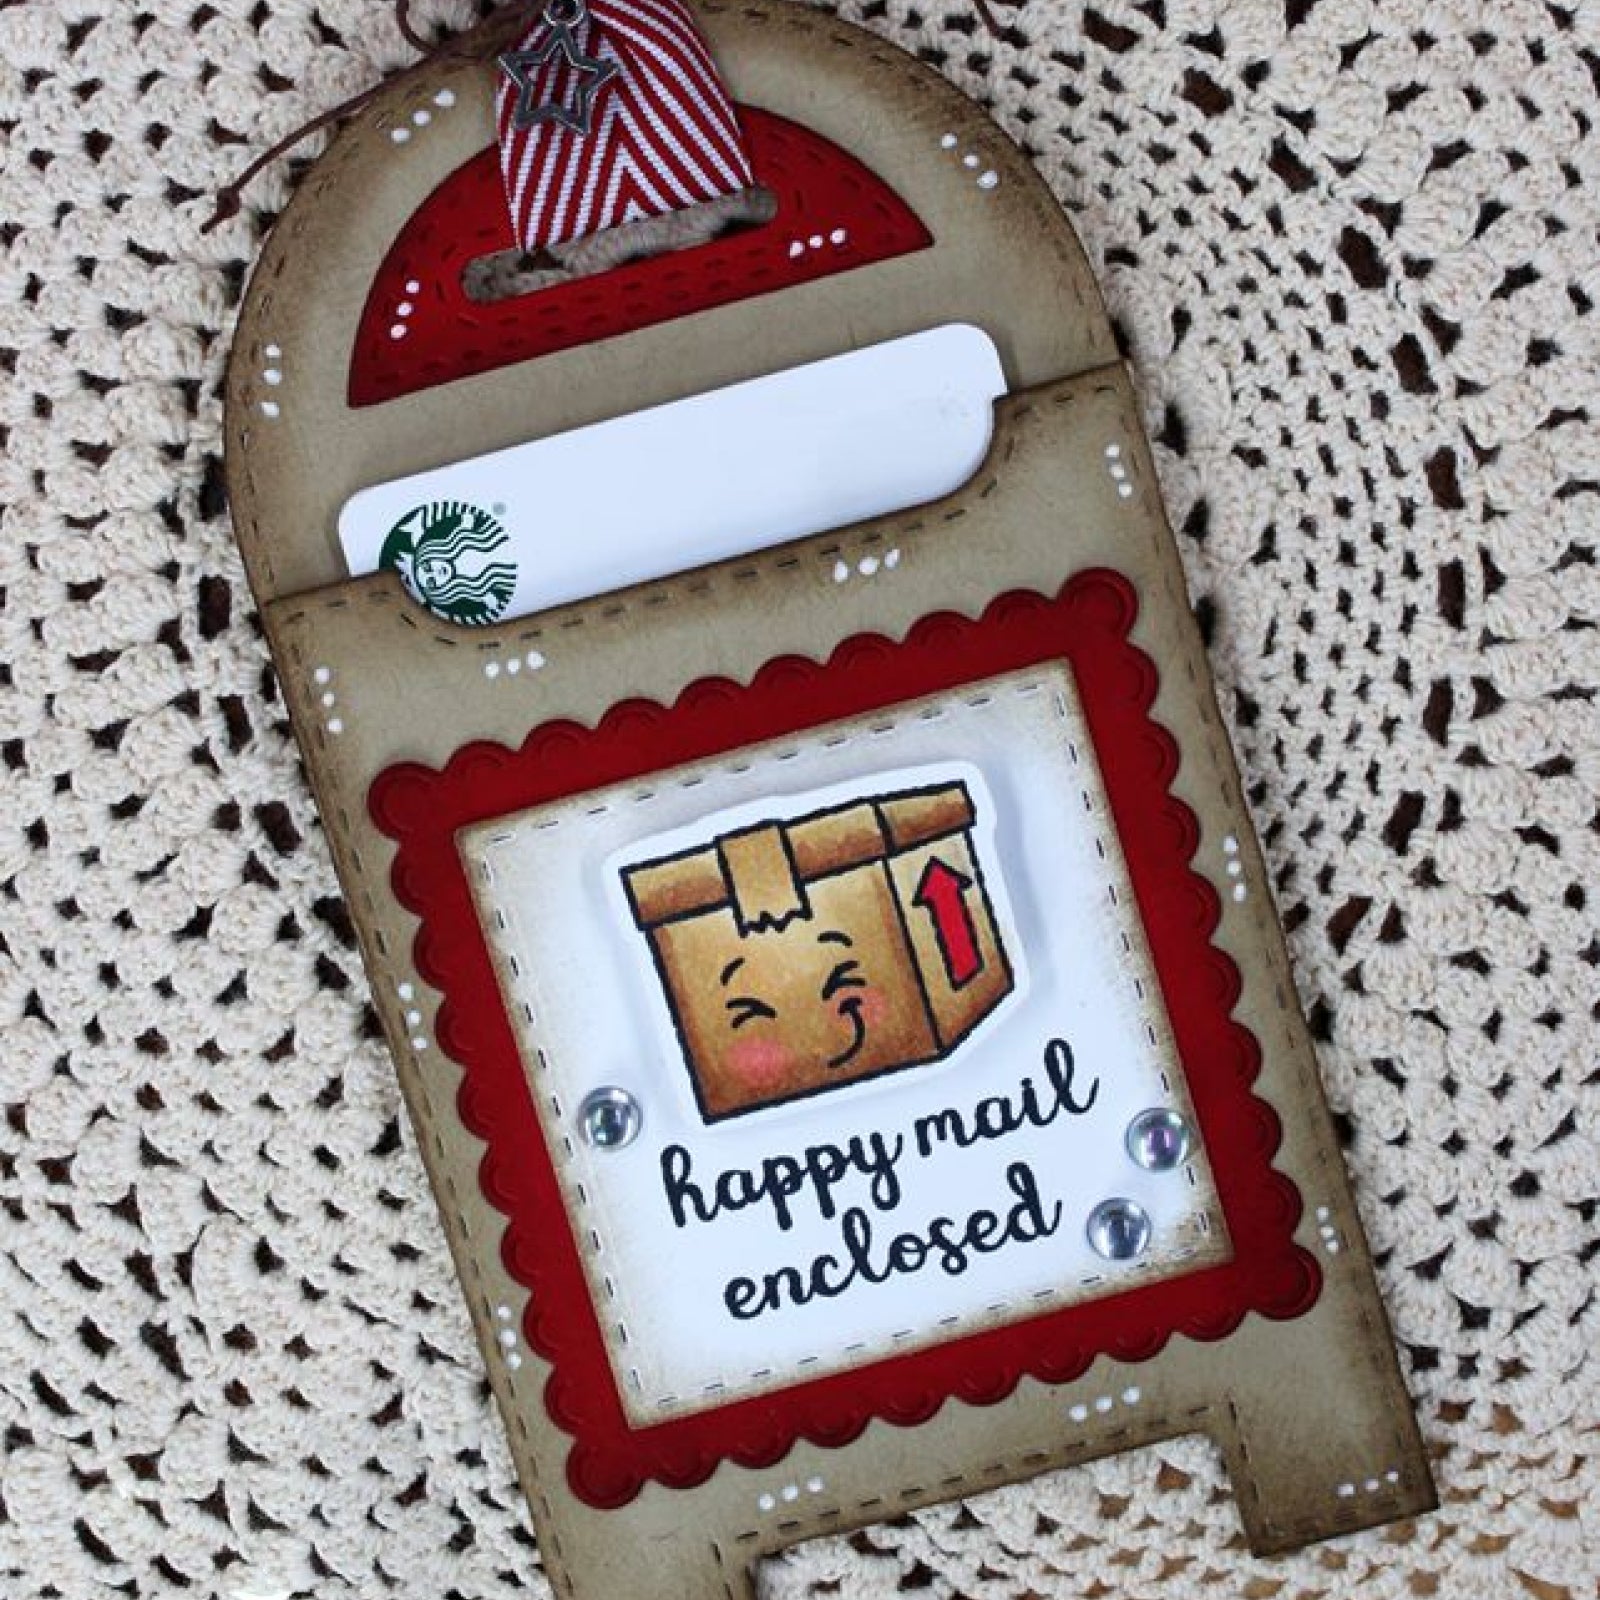 Stitched Mailbox Pocket Tag Cutting & Embossing Dies